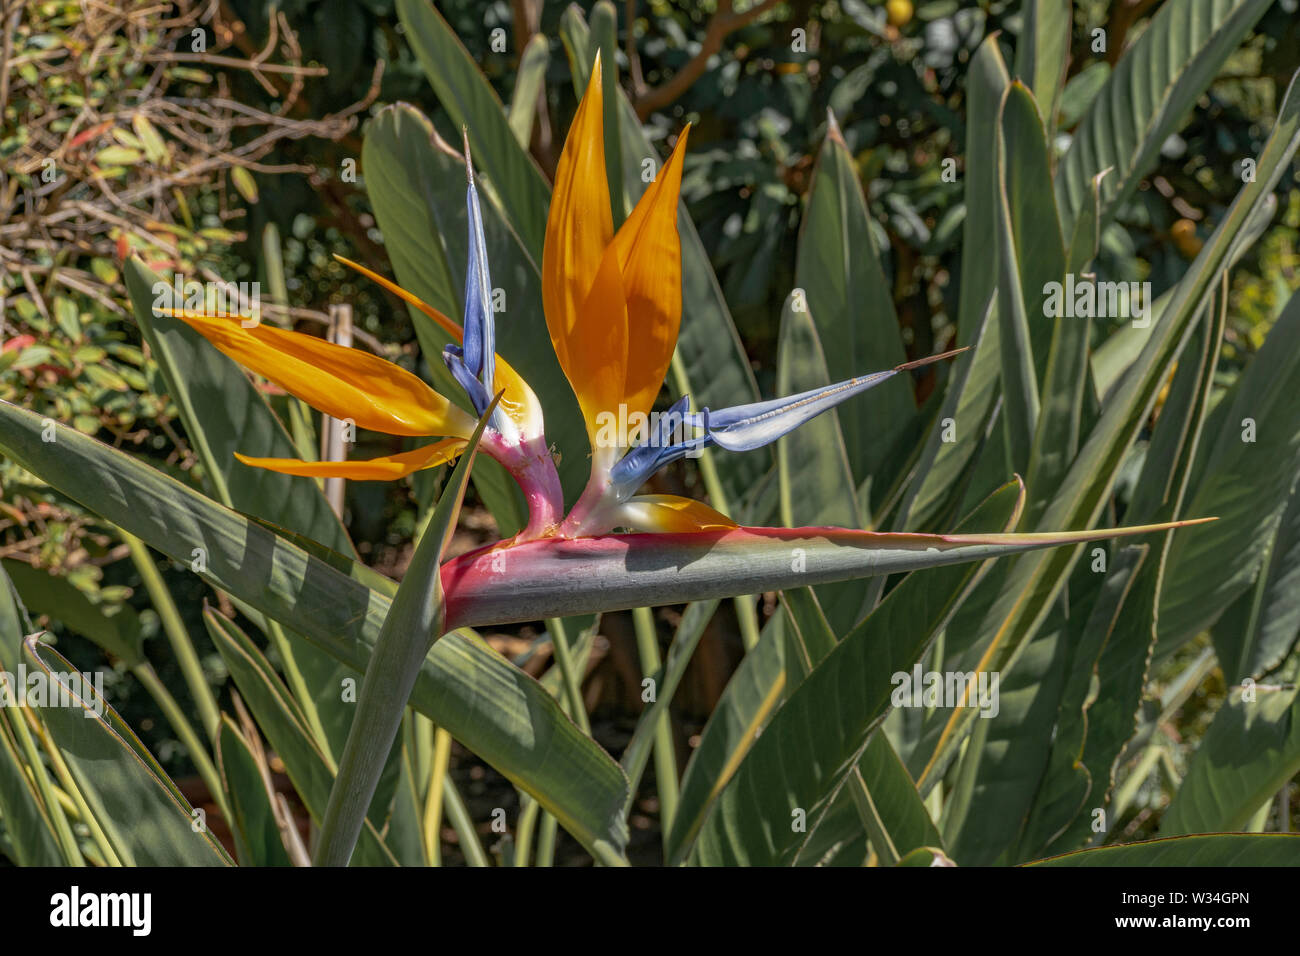 Bird of Paradise flower image taken in a garden setting against a leafy green background Stock Photo